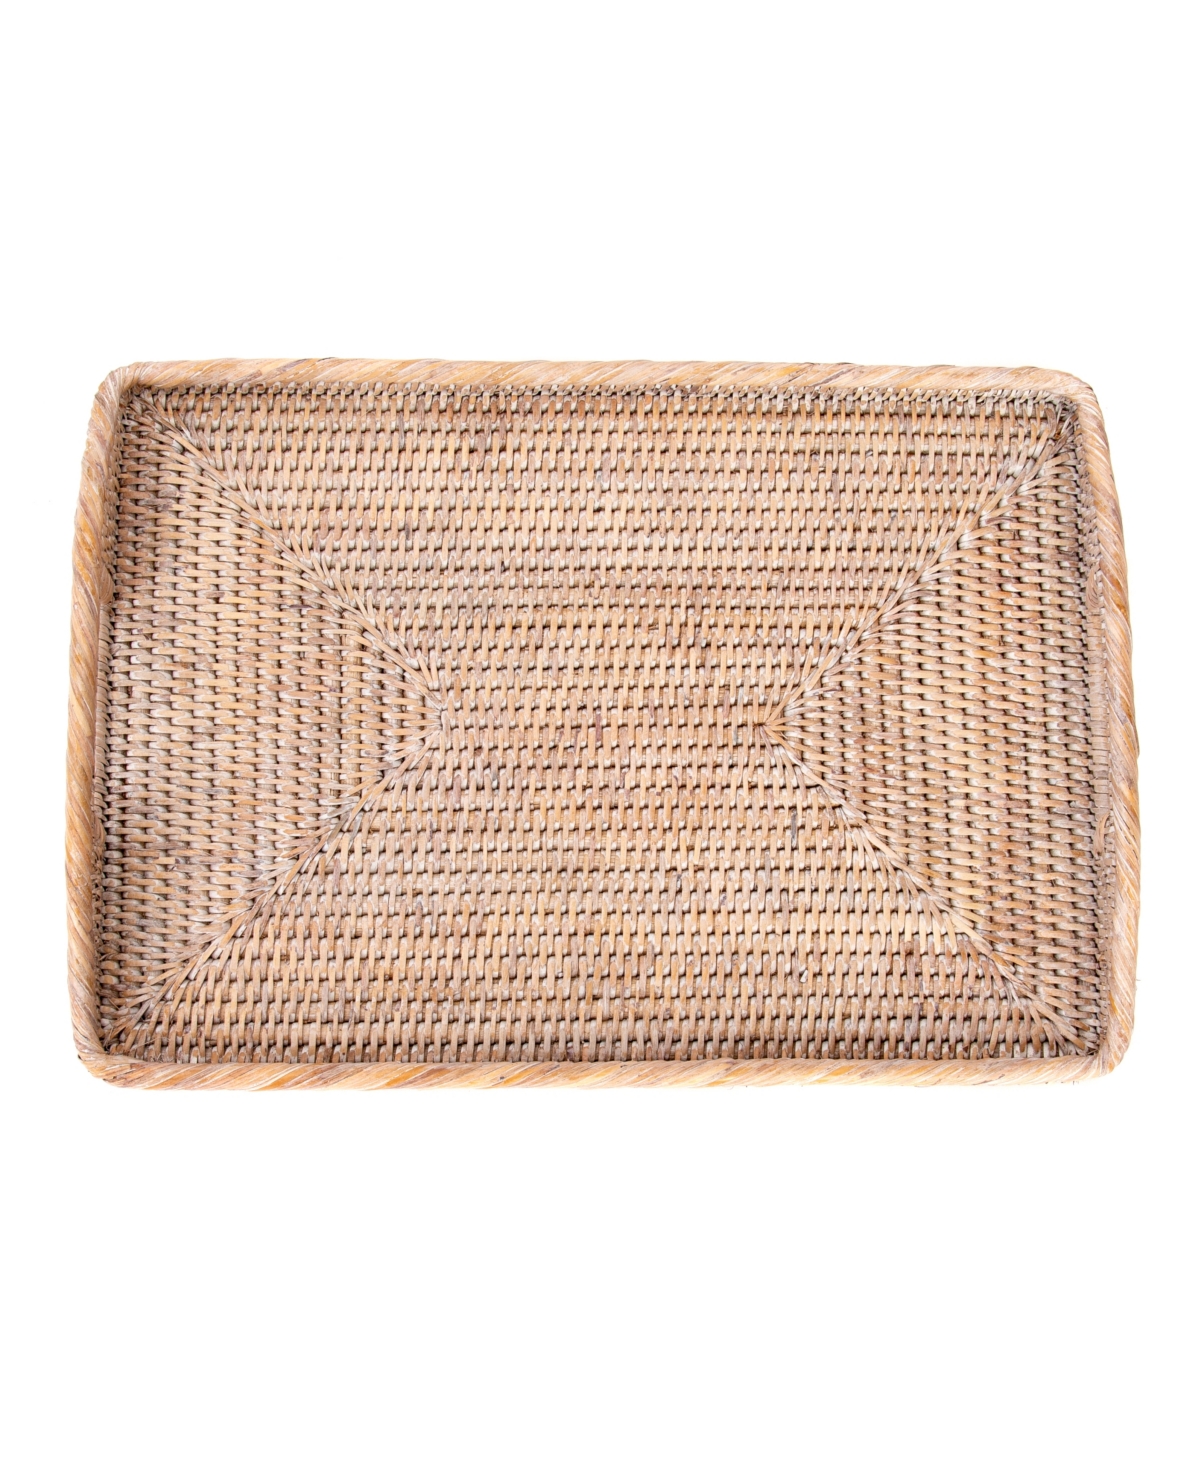 Shop Artifacts Trading Company Artifacts Rattan 14" Rectangular Tray In Off-white